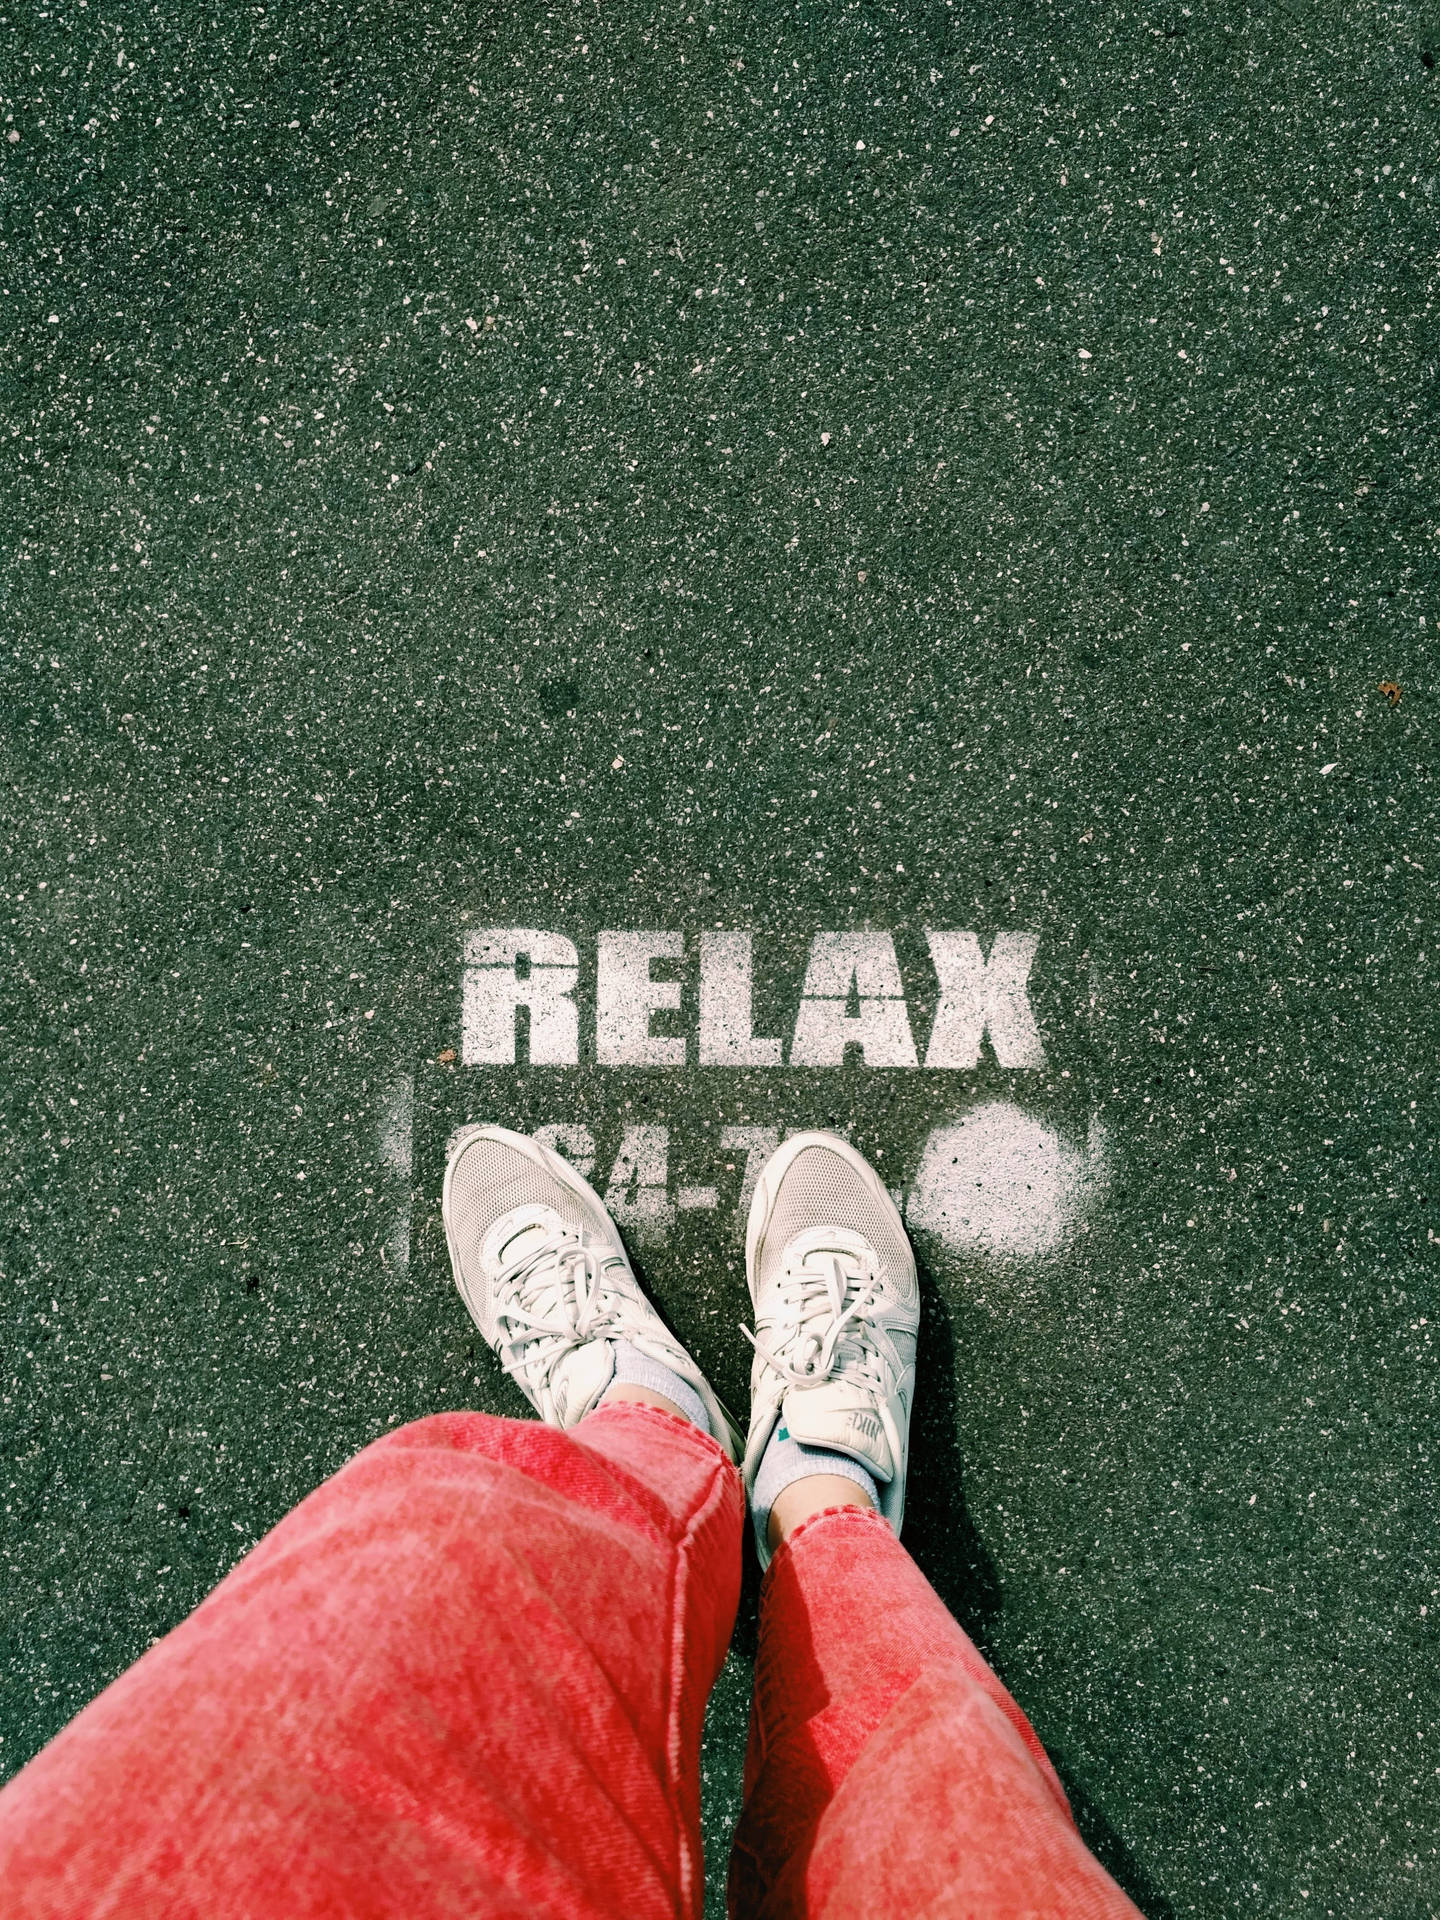 Shoes On Relax Sign Wallpaper